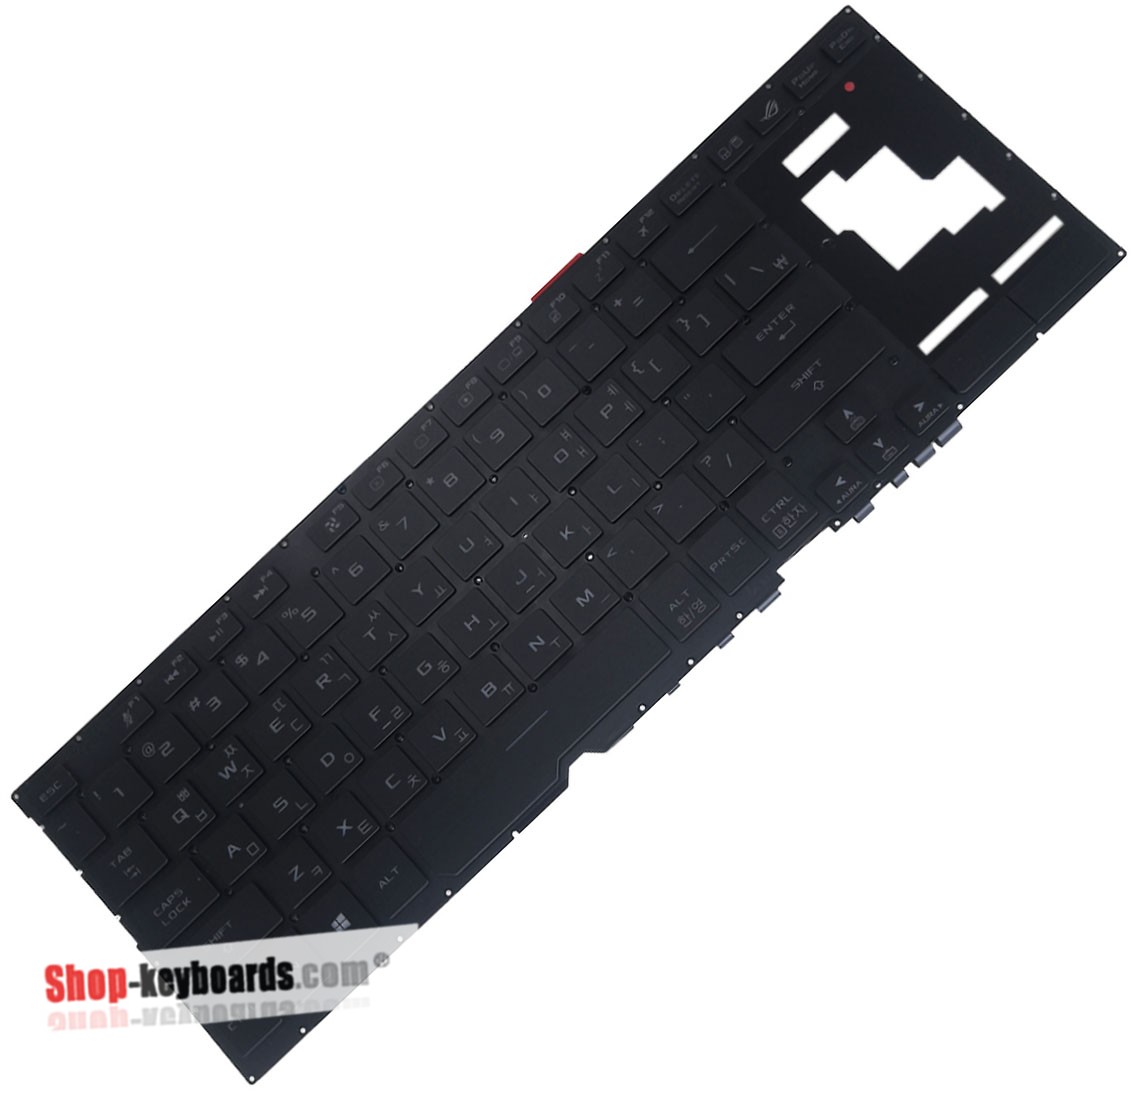 Asus 0KN1-661US11 Keyboard replacement